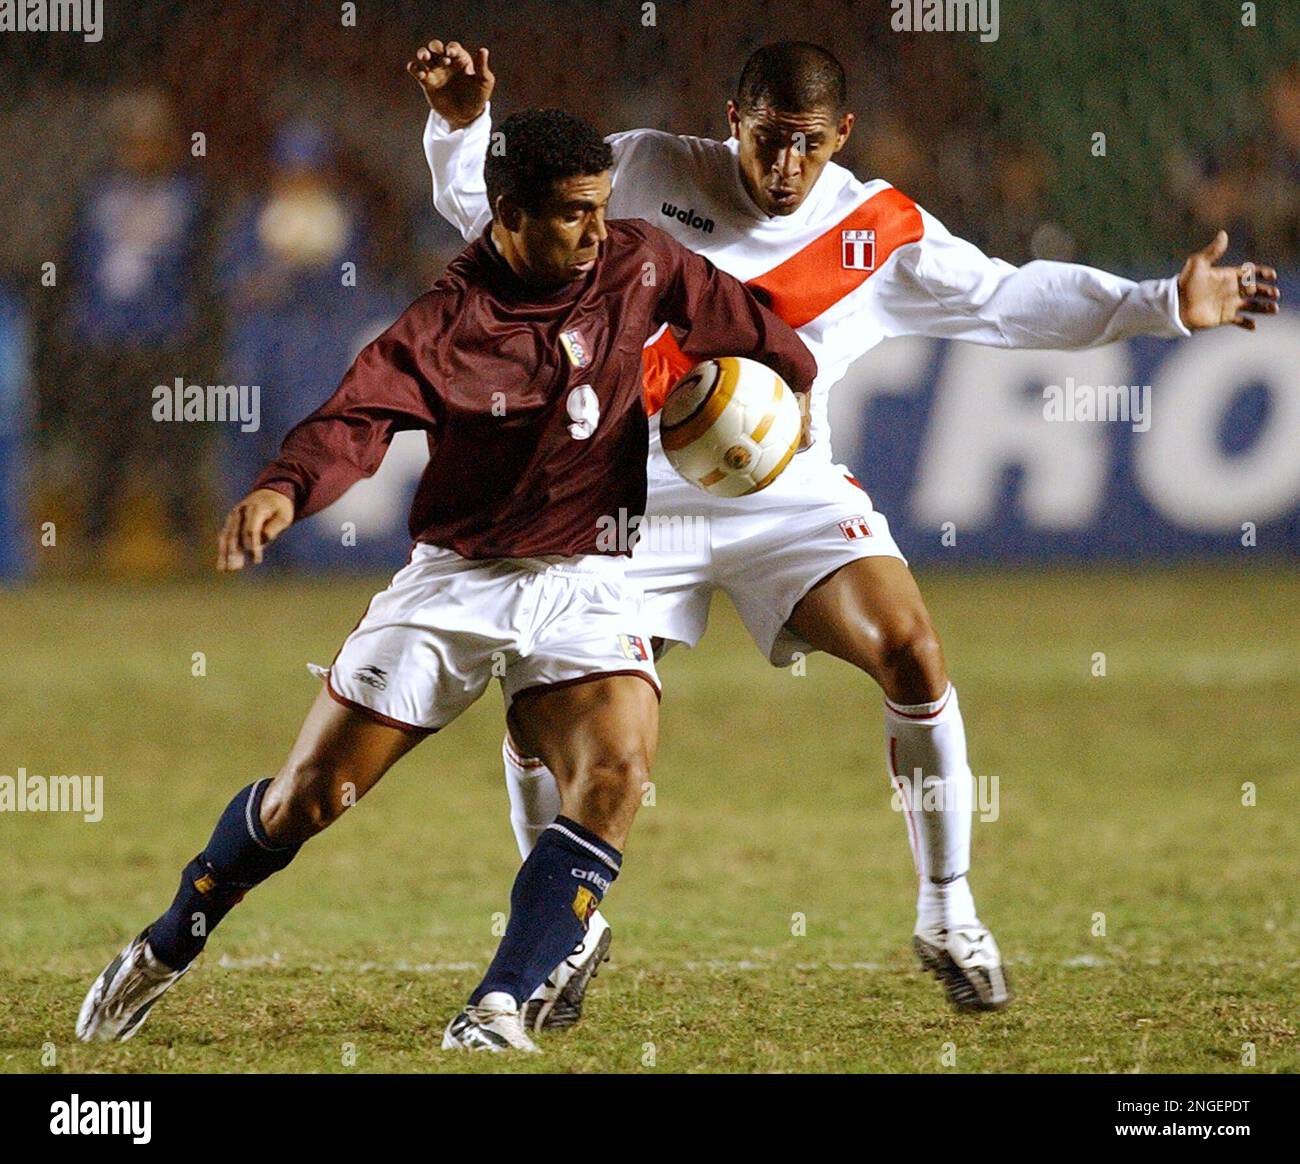 Peru's Santiago Acasiete, right, fights for the ball against Venezuela's Alexander  Rondon during their Copa America match in Lima, Peru on Friday, July 9,  2004.(AP Photo/Dolores Ochoa Stock Photo - Alamy